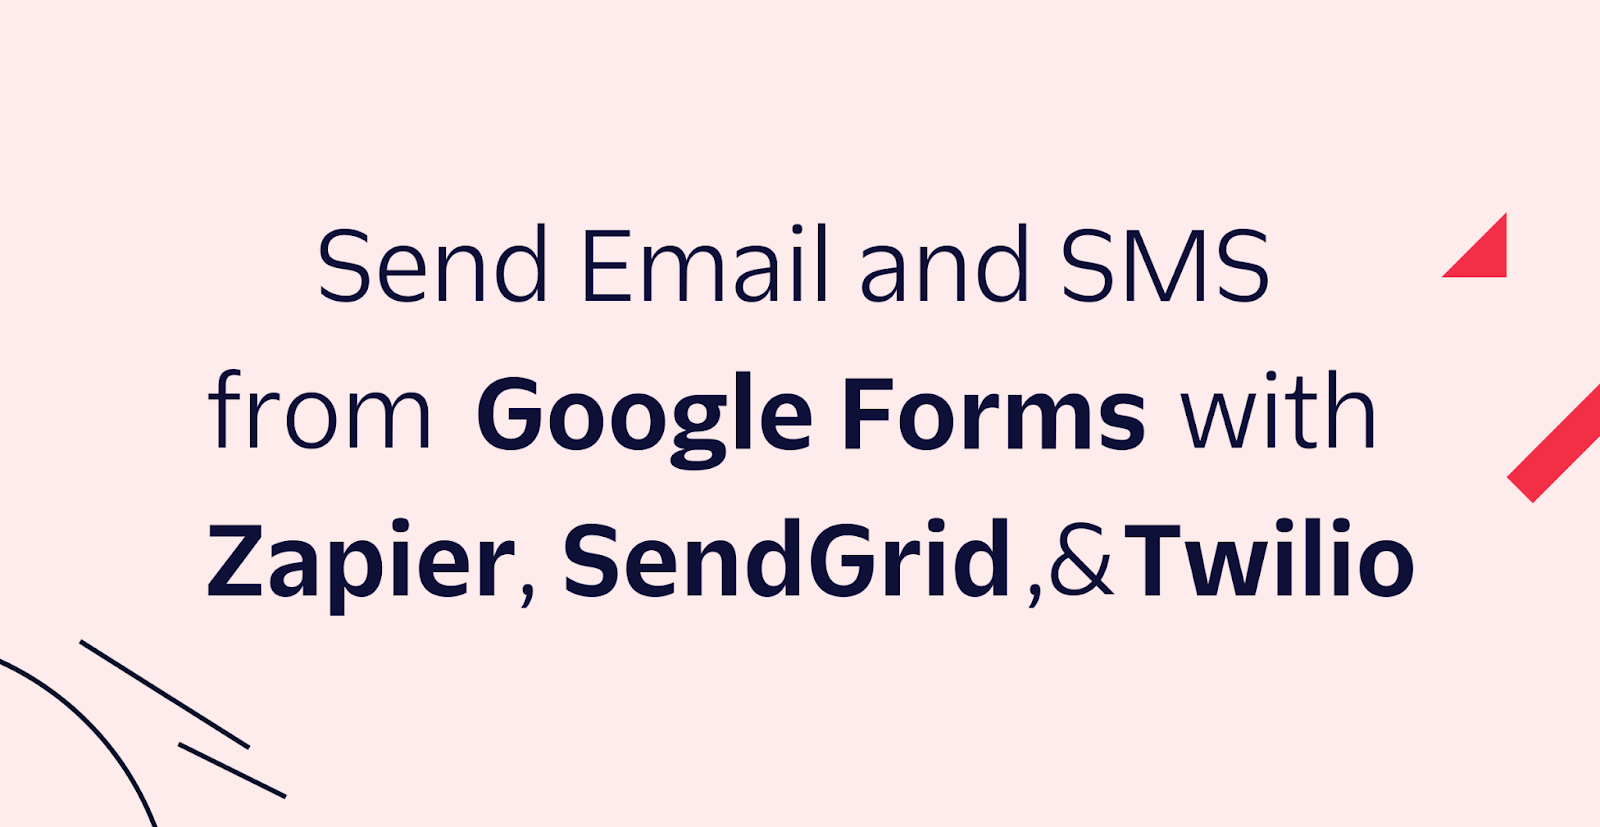 Send Email and SMS from Google Forms using Zapier, SendGrid, and Twilio